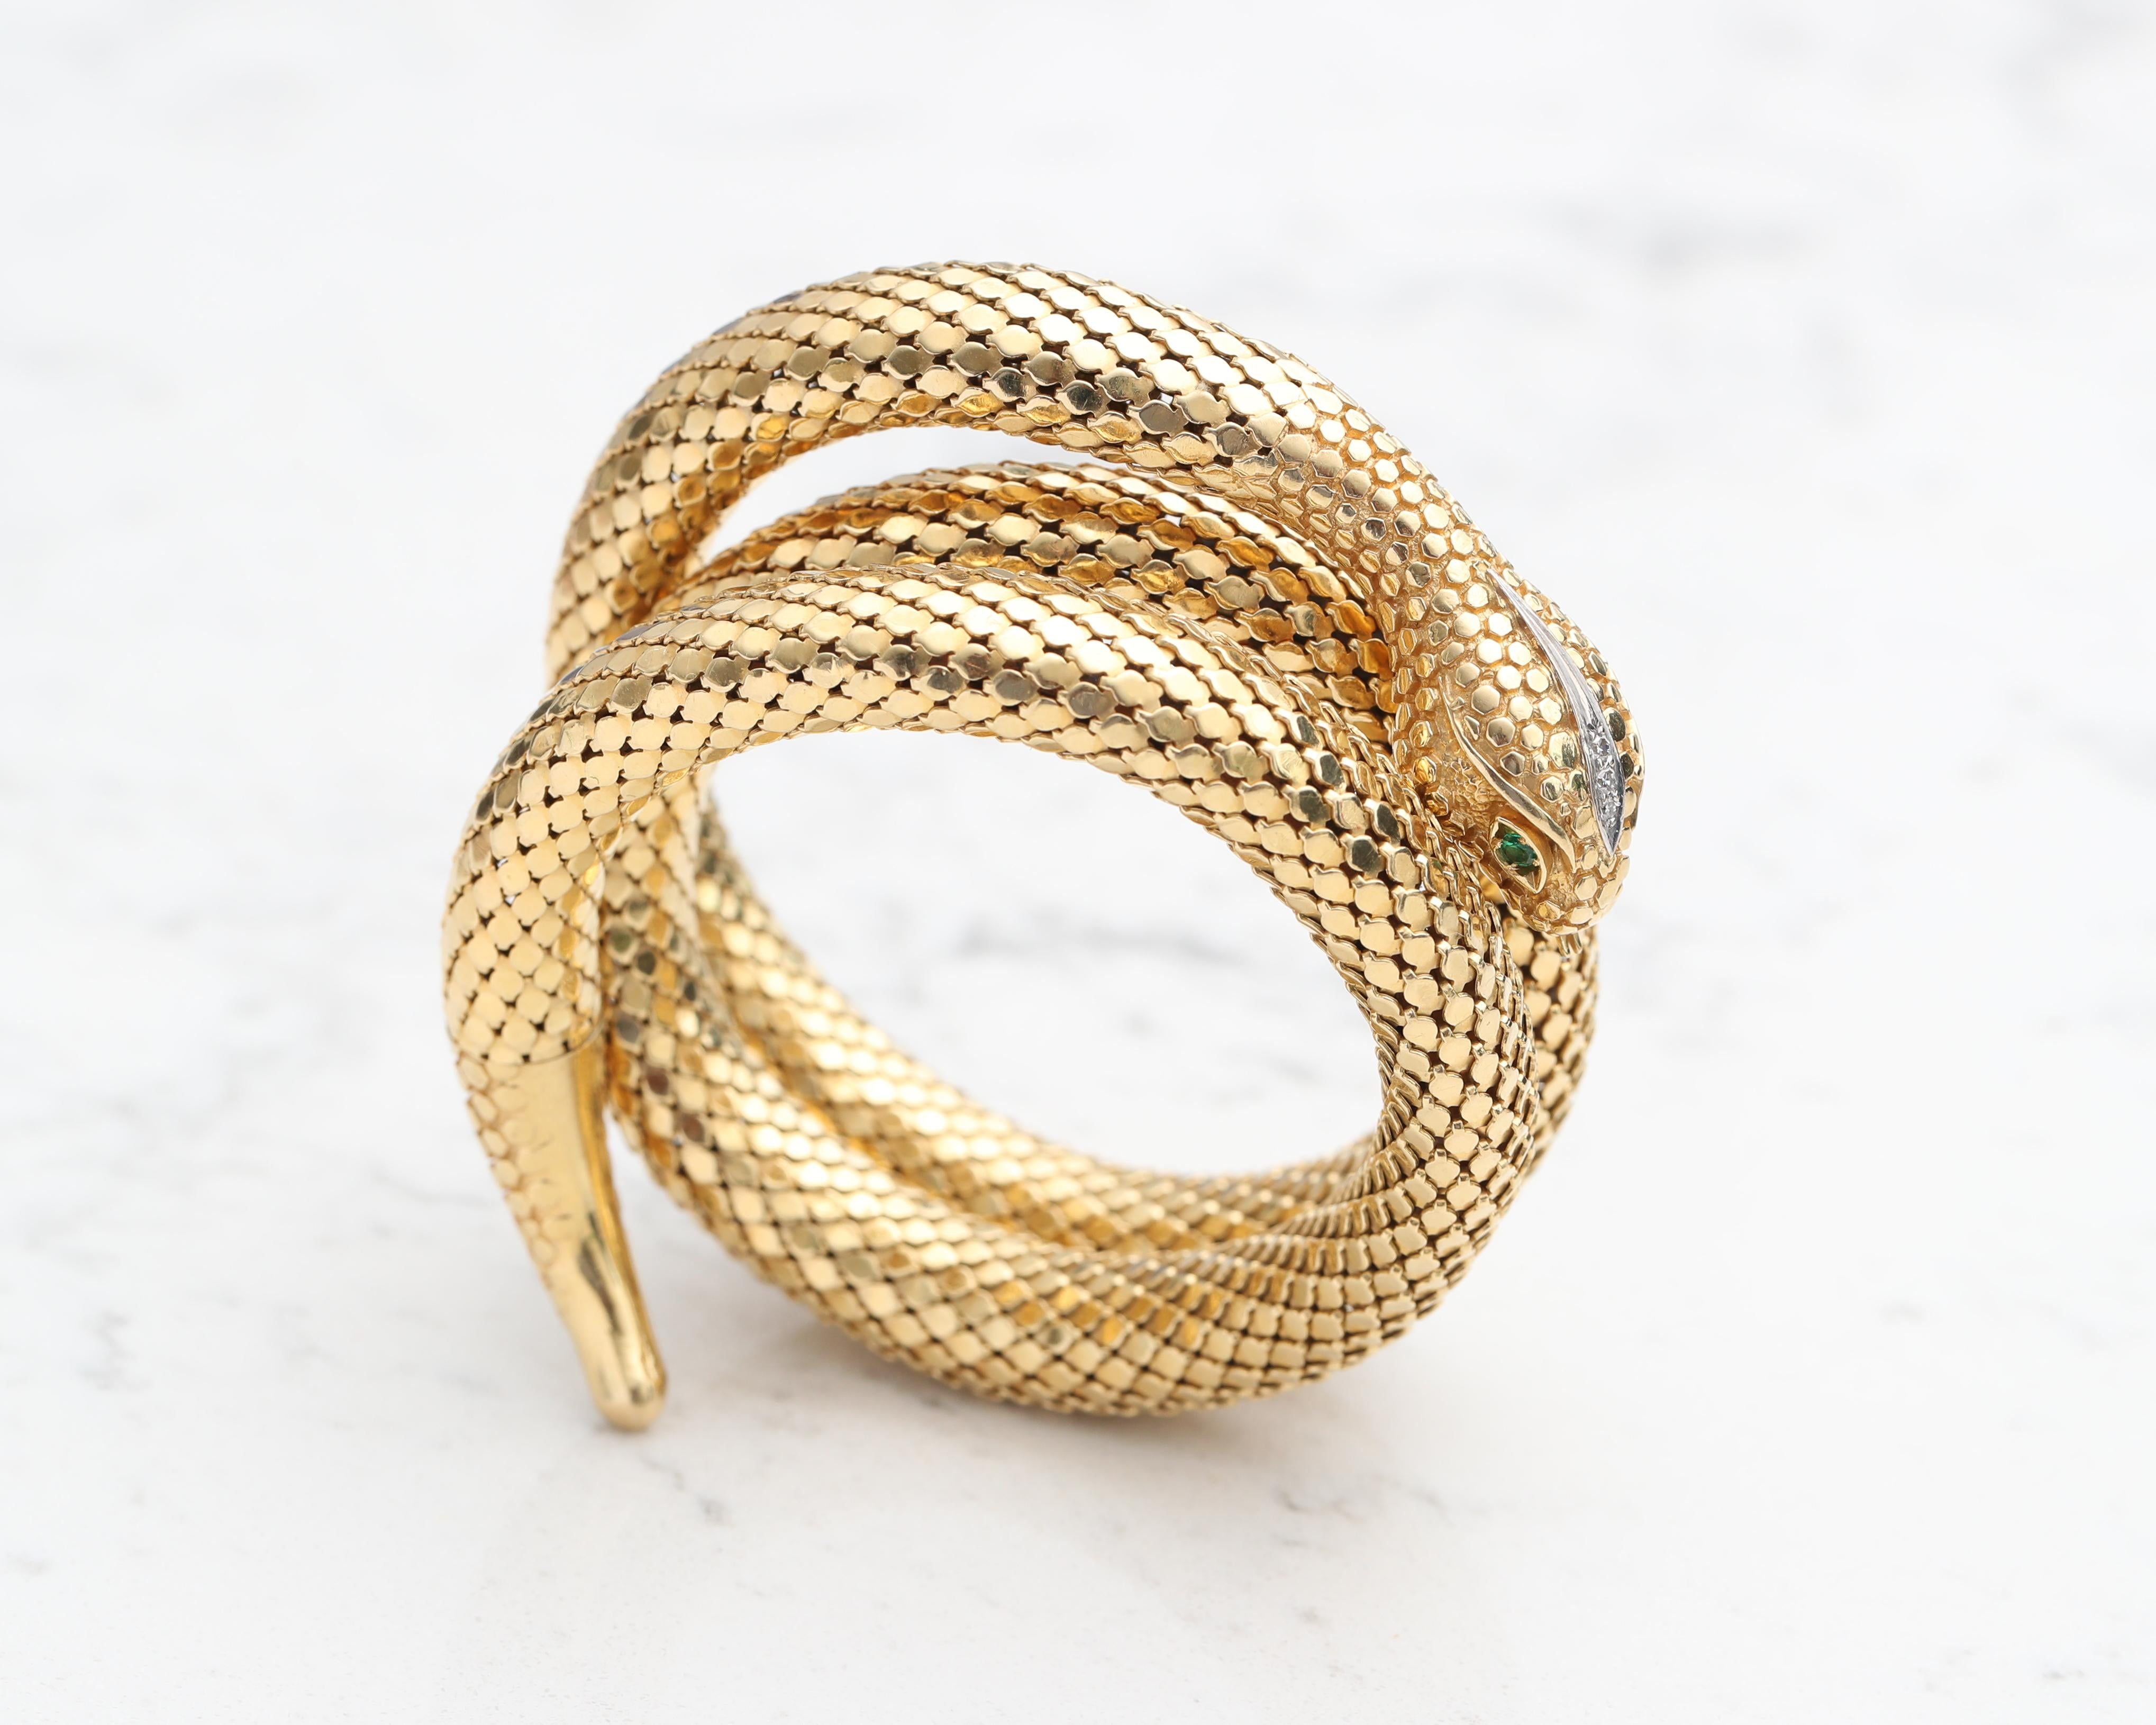 1990s 18 Karat Yellow Gold Serpent Bangle Bracelet

Emerald Gemstones are the Eyes and Accent Diamonds are placed on the edge of the eyes and on the head. 

Extremely well made bangle with strong 18 karat gold that stands out. 

Incredibly flexible